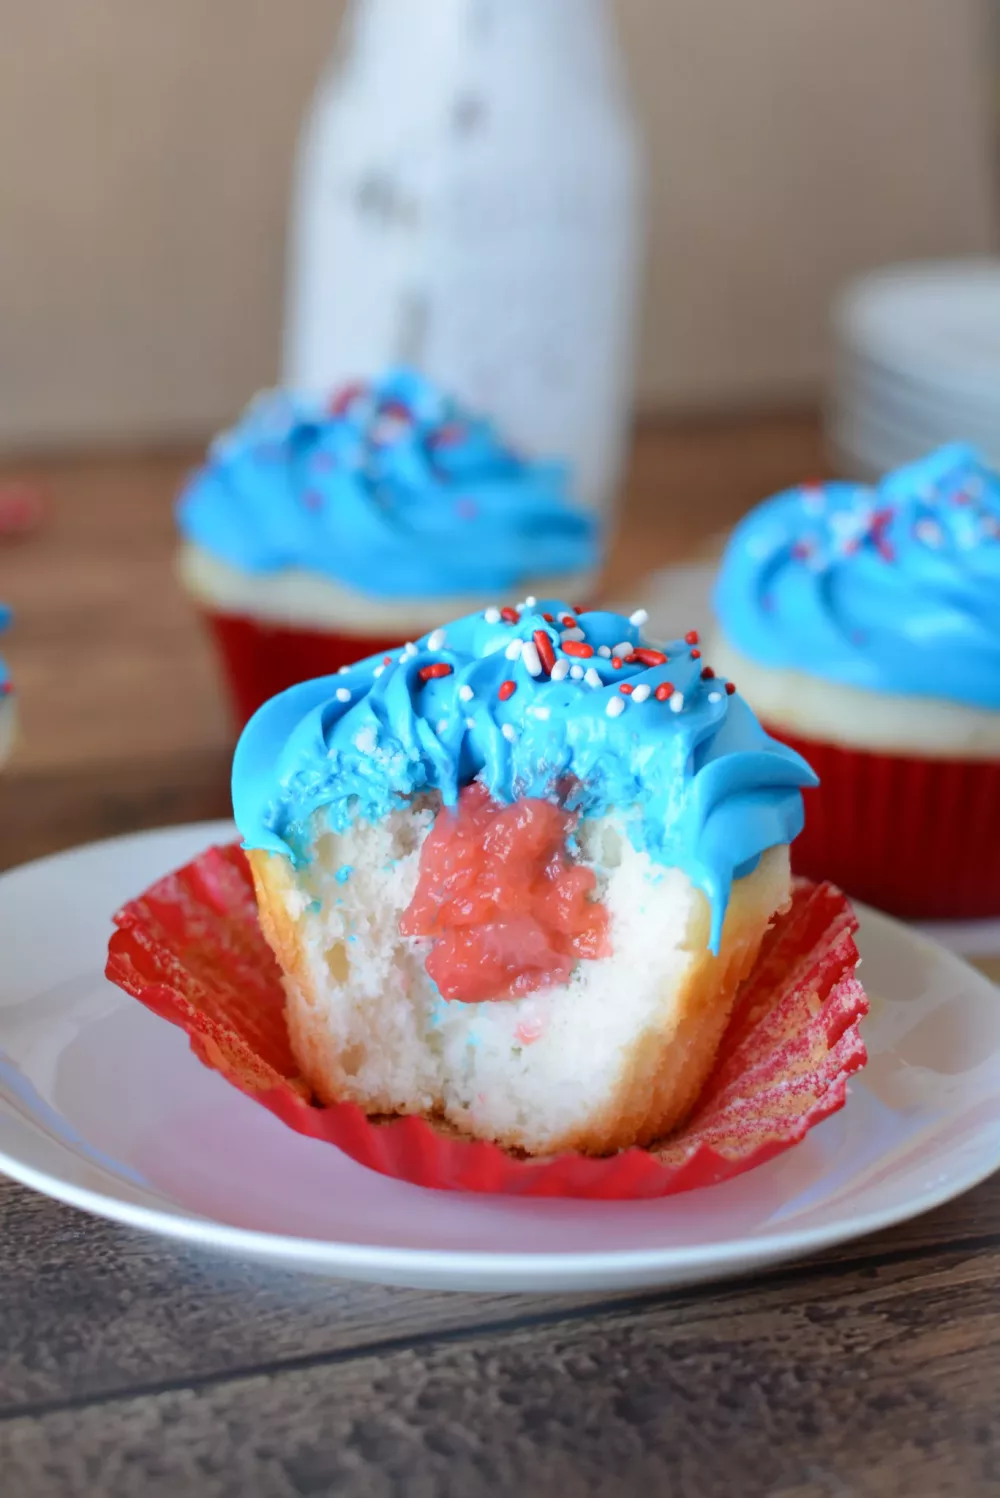 Vanilla cupcake filled with macerated strawberries and frosted with blue frosting and patriotic jimmies